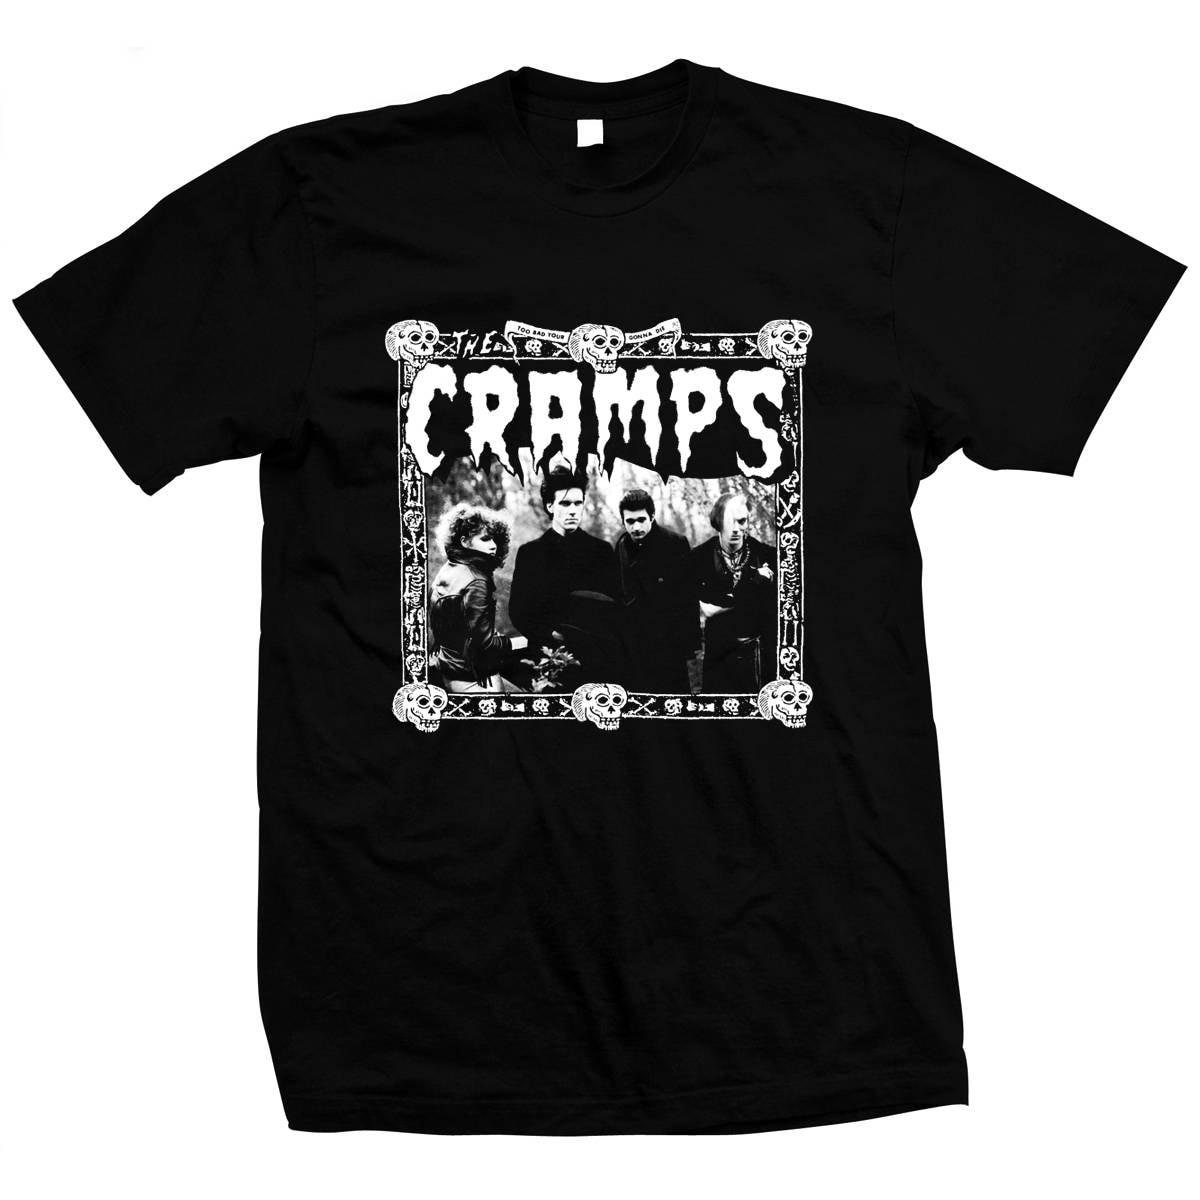 The Cramps Member Poison Ivy Black Text Unisex T-shirt Best Gift For Rock Music Fans